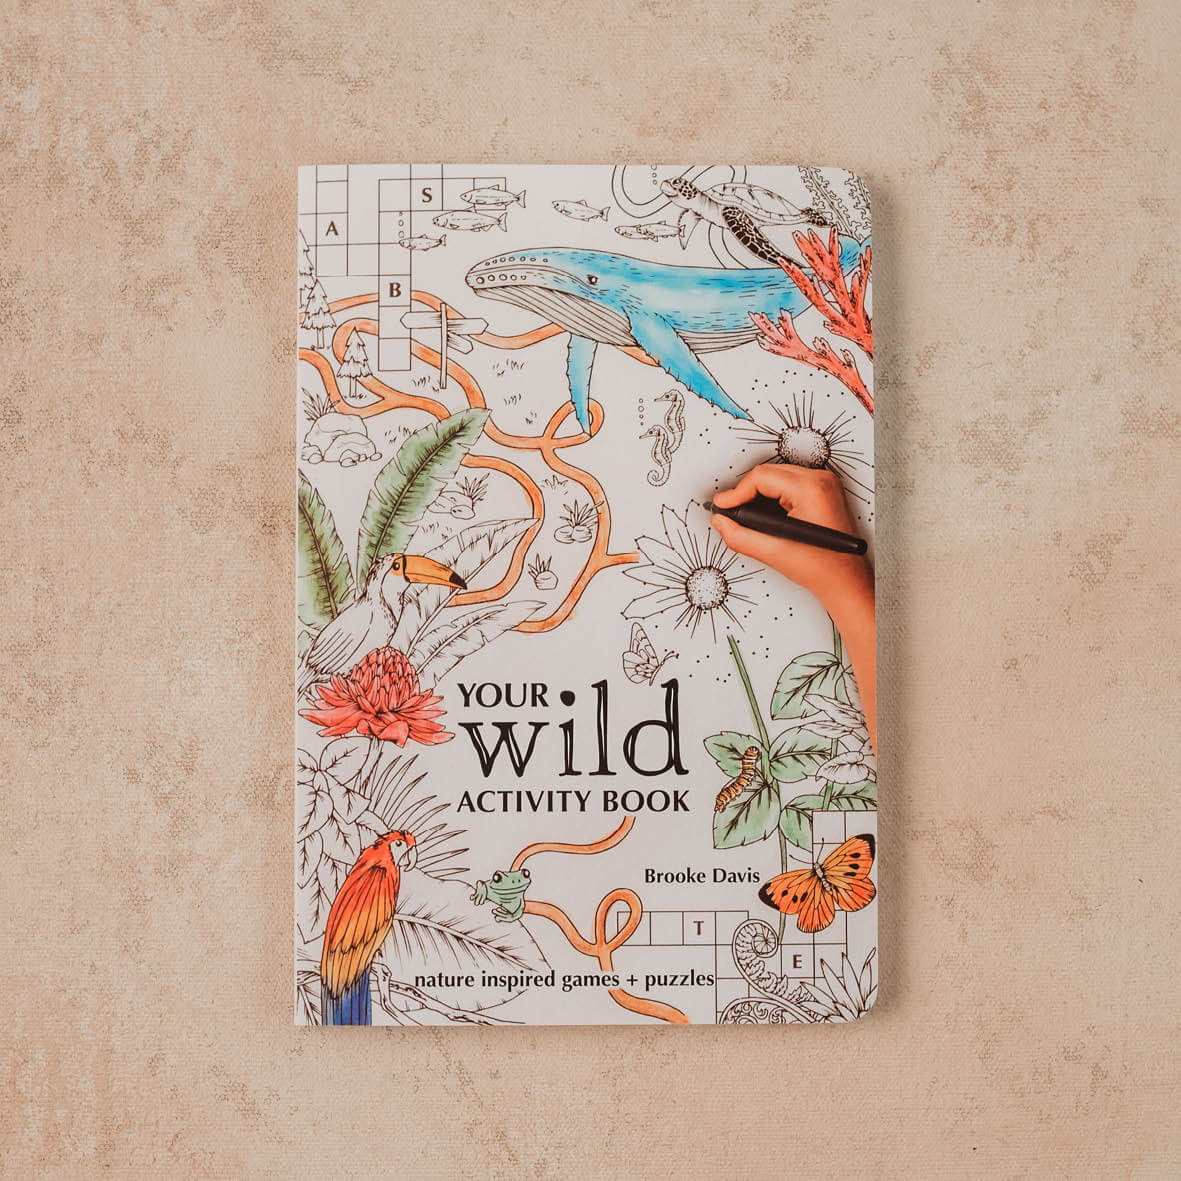 Your Wild Activity Book, nature inspired games and puzzles, made in Australia by Your Wild Books.